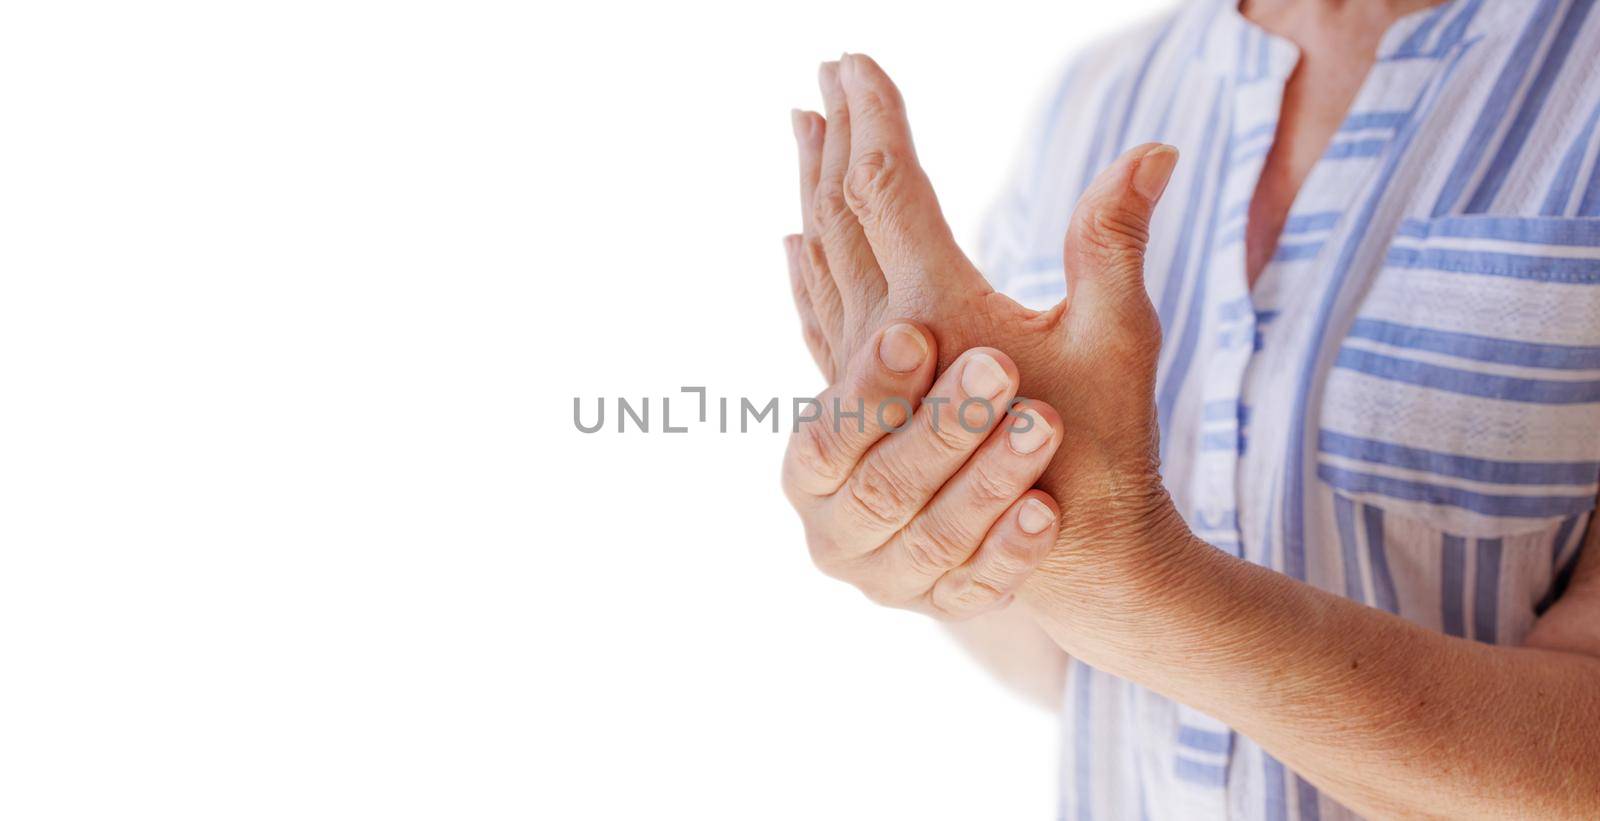 Elderly woman suffering from pain, numbness, weakness in arms. Causes of pain include osteoarthritis, rheumatoid arthritis, gout, peripheral neuropathy, lupus, Raynaud's phenomenon. White background